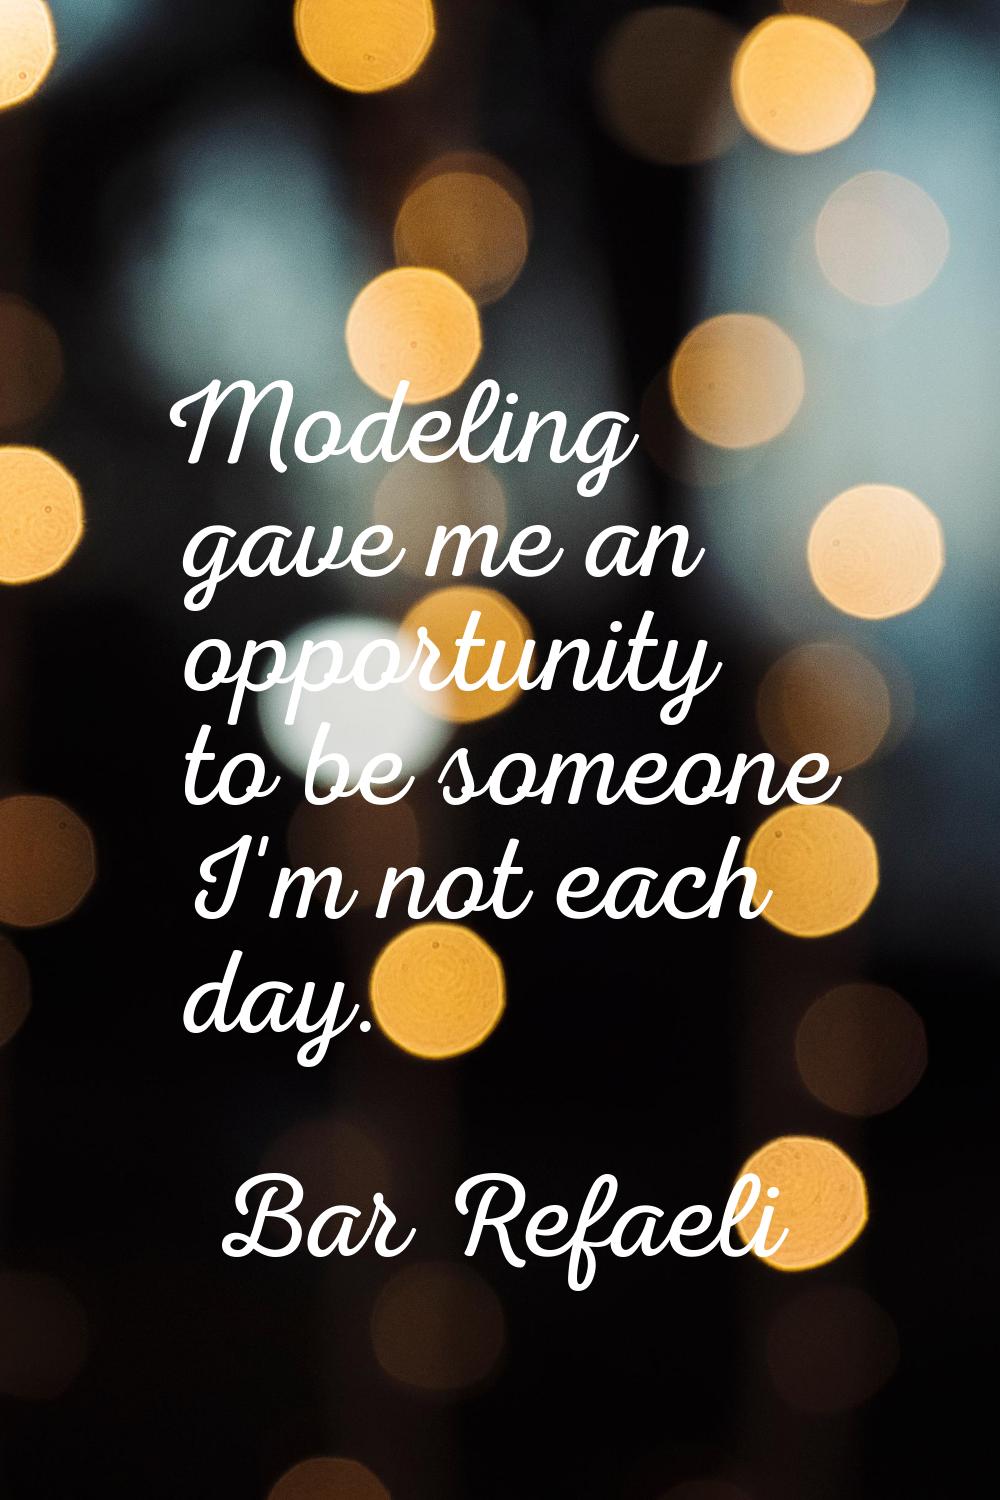 Modeling gave me an opportunity to be someone I'm not each day.